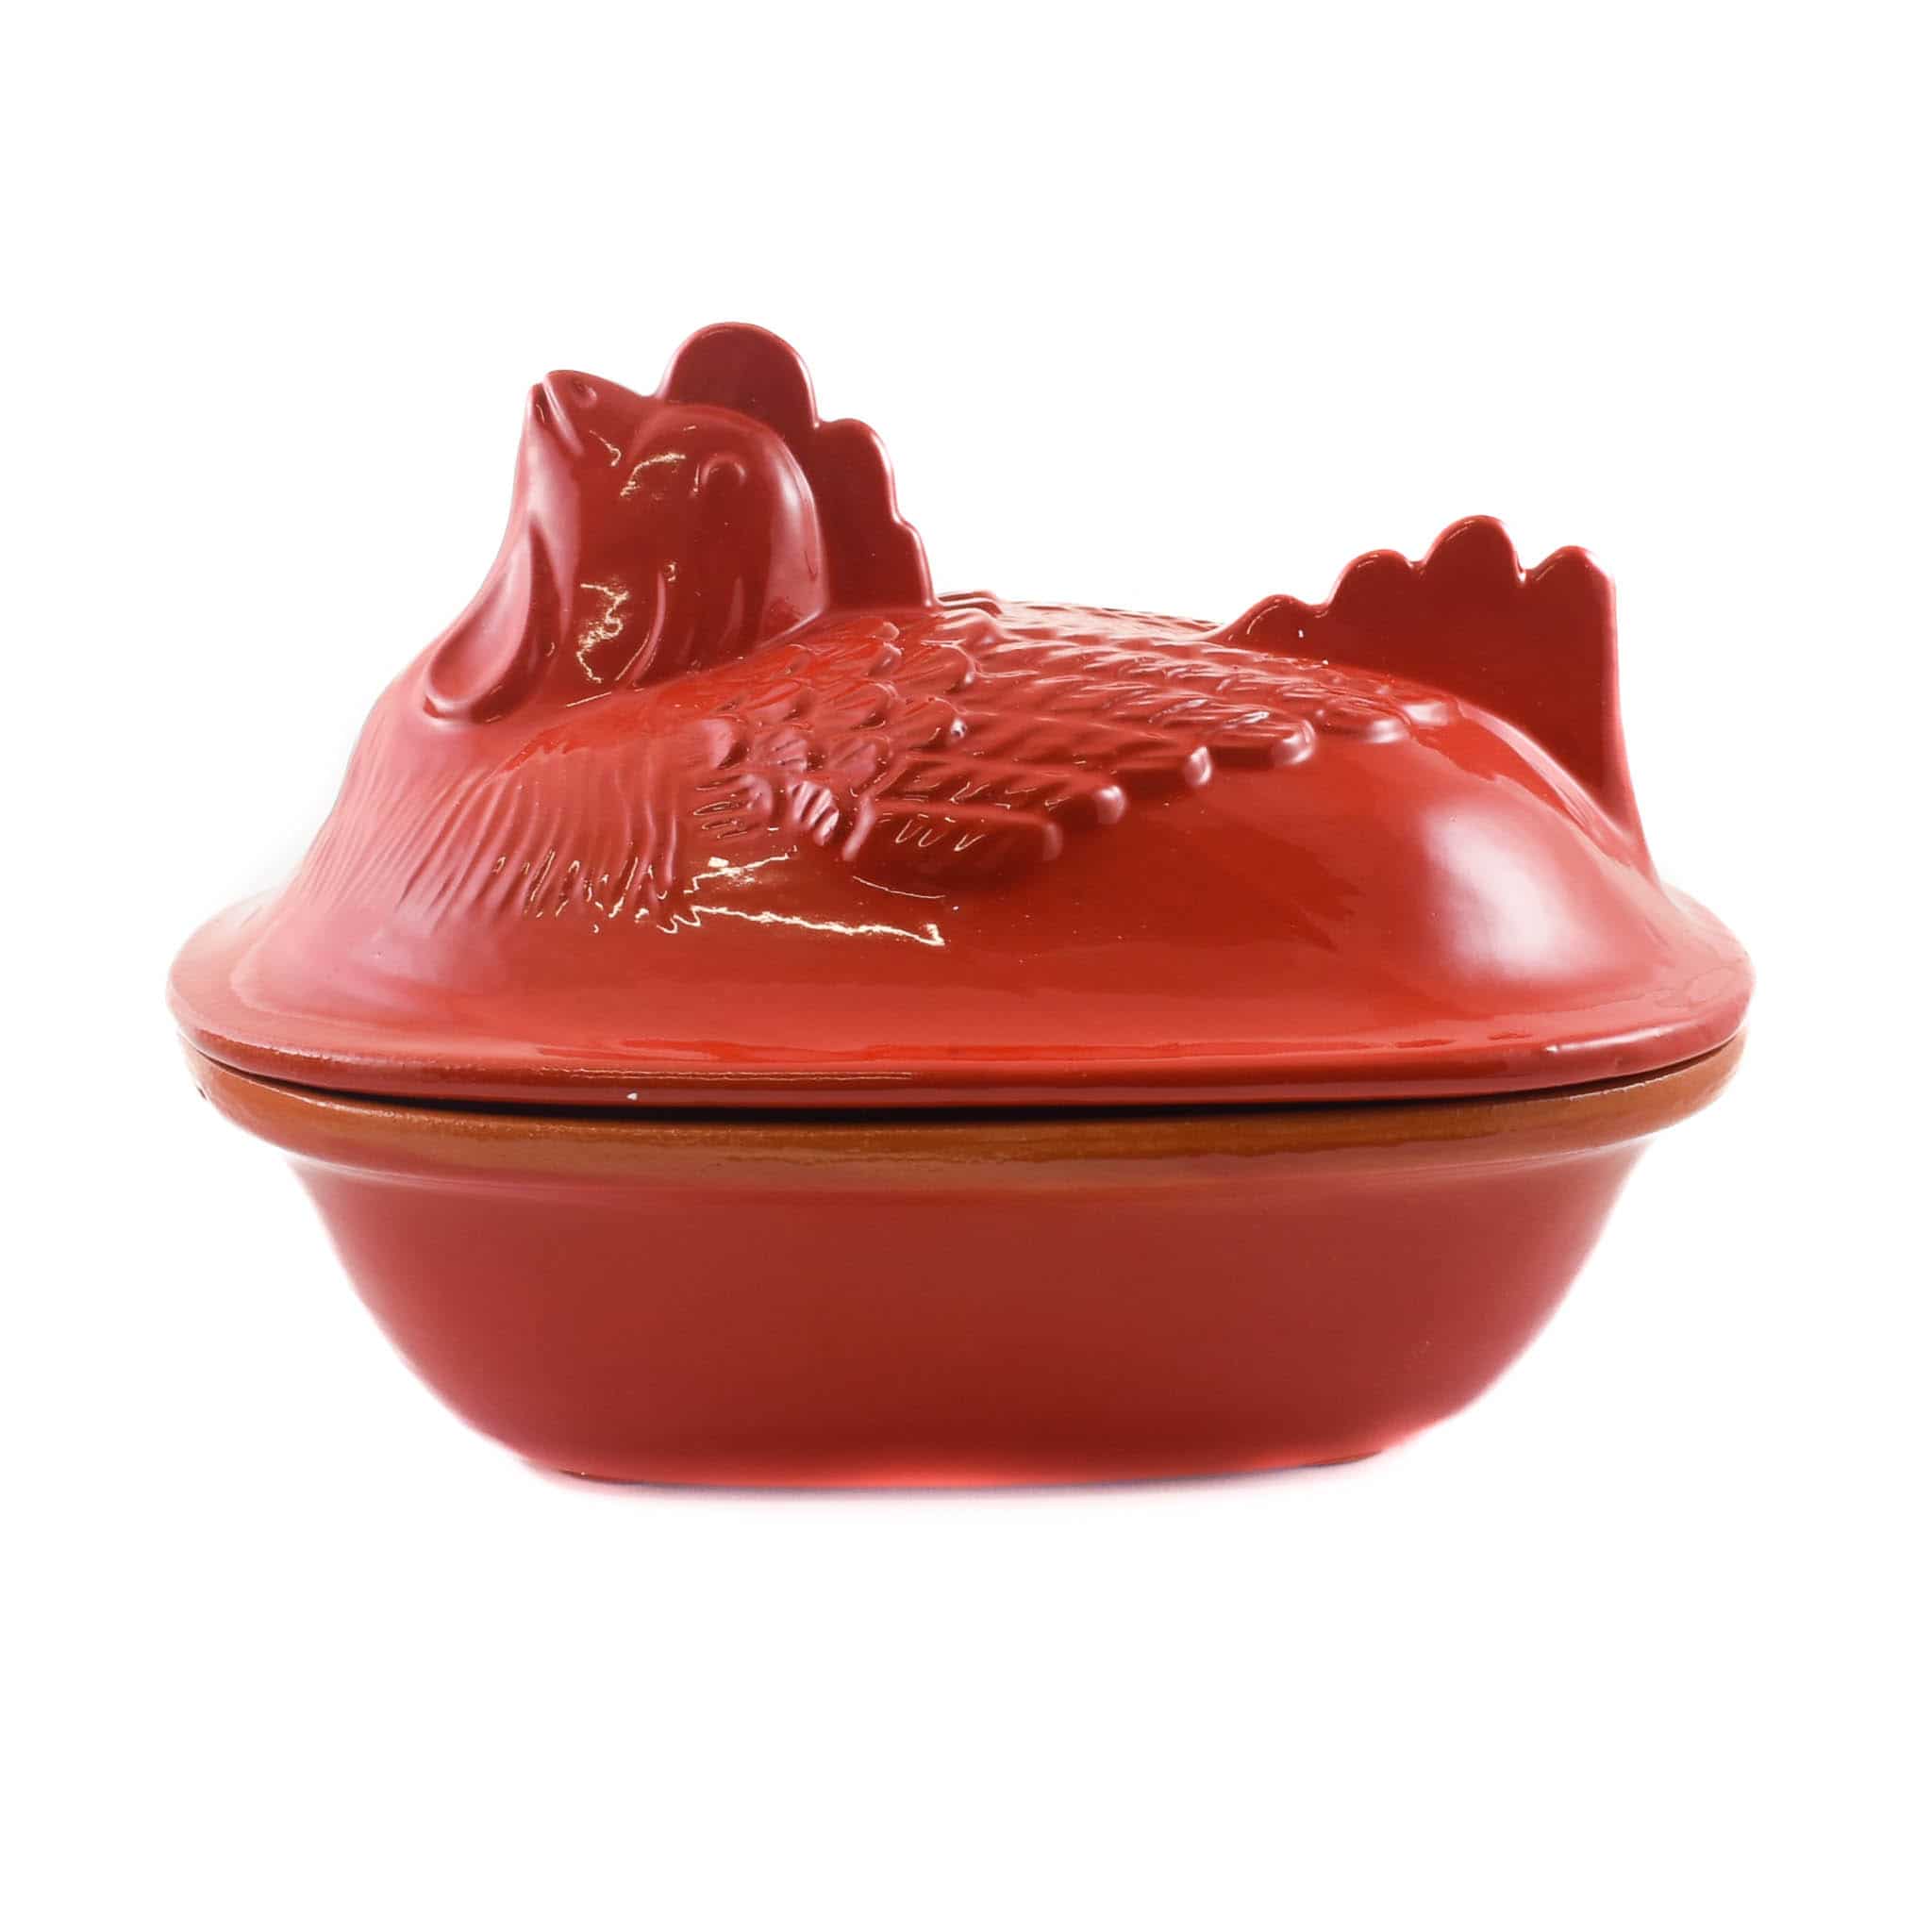 Terracotta Red Rooster Roasting Dish, 32cm